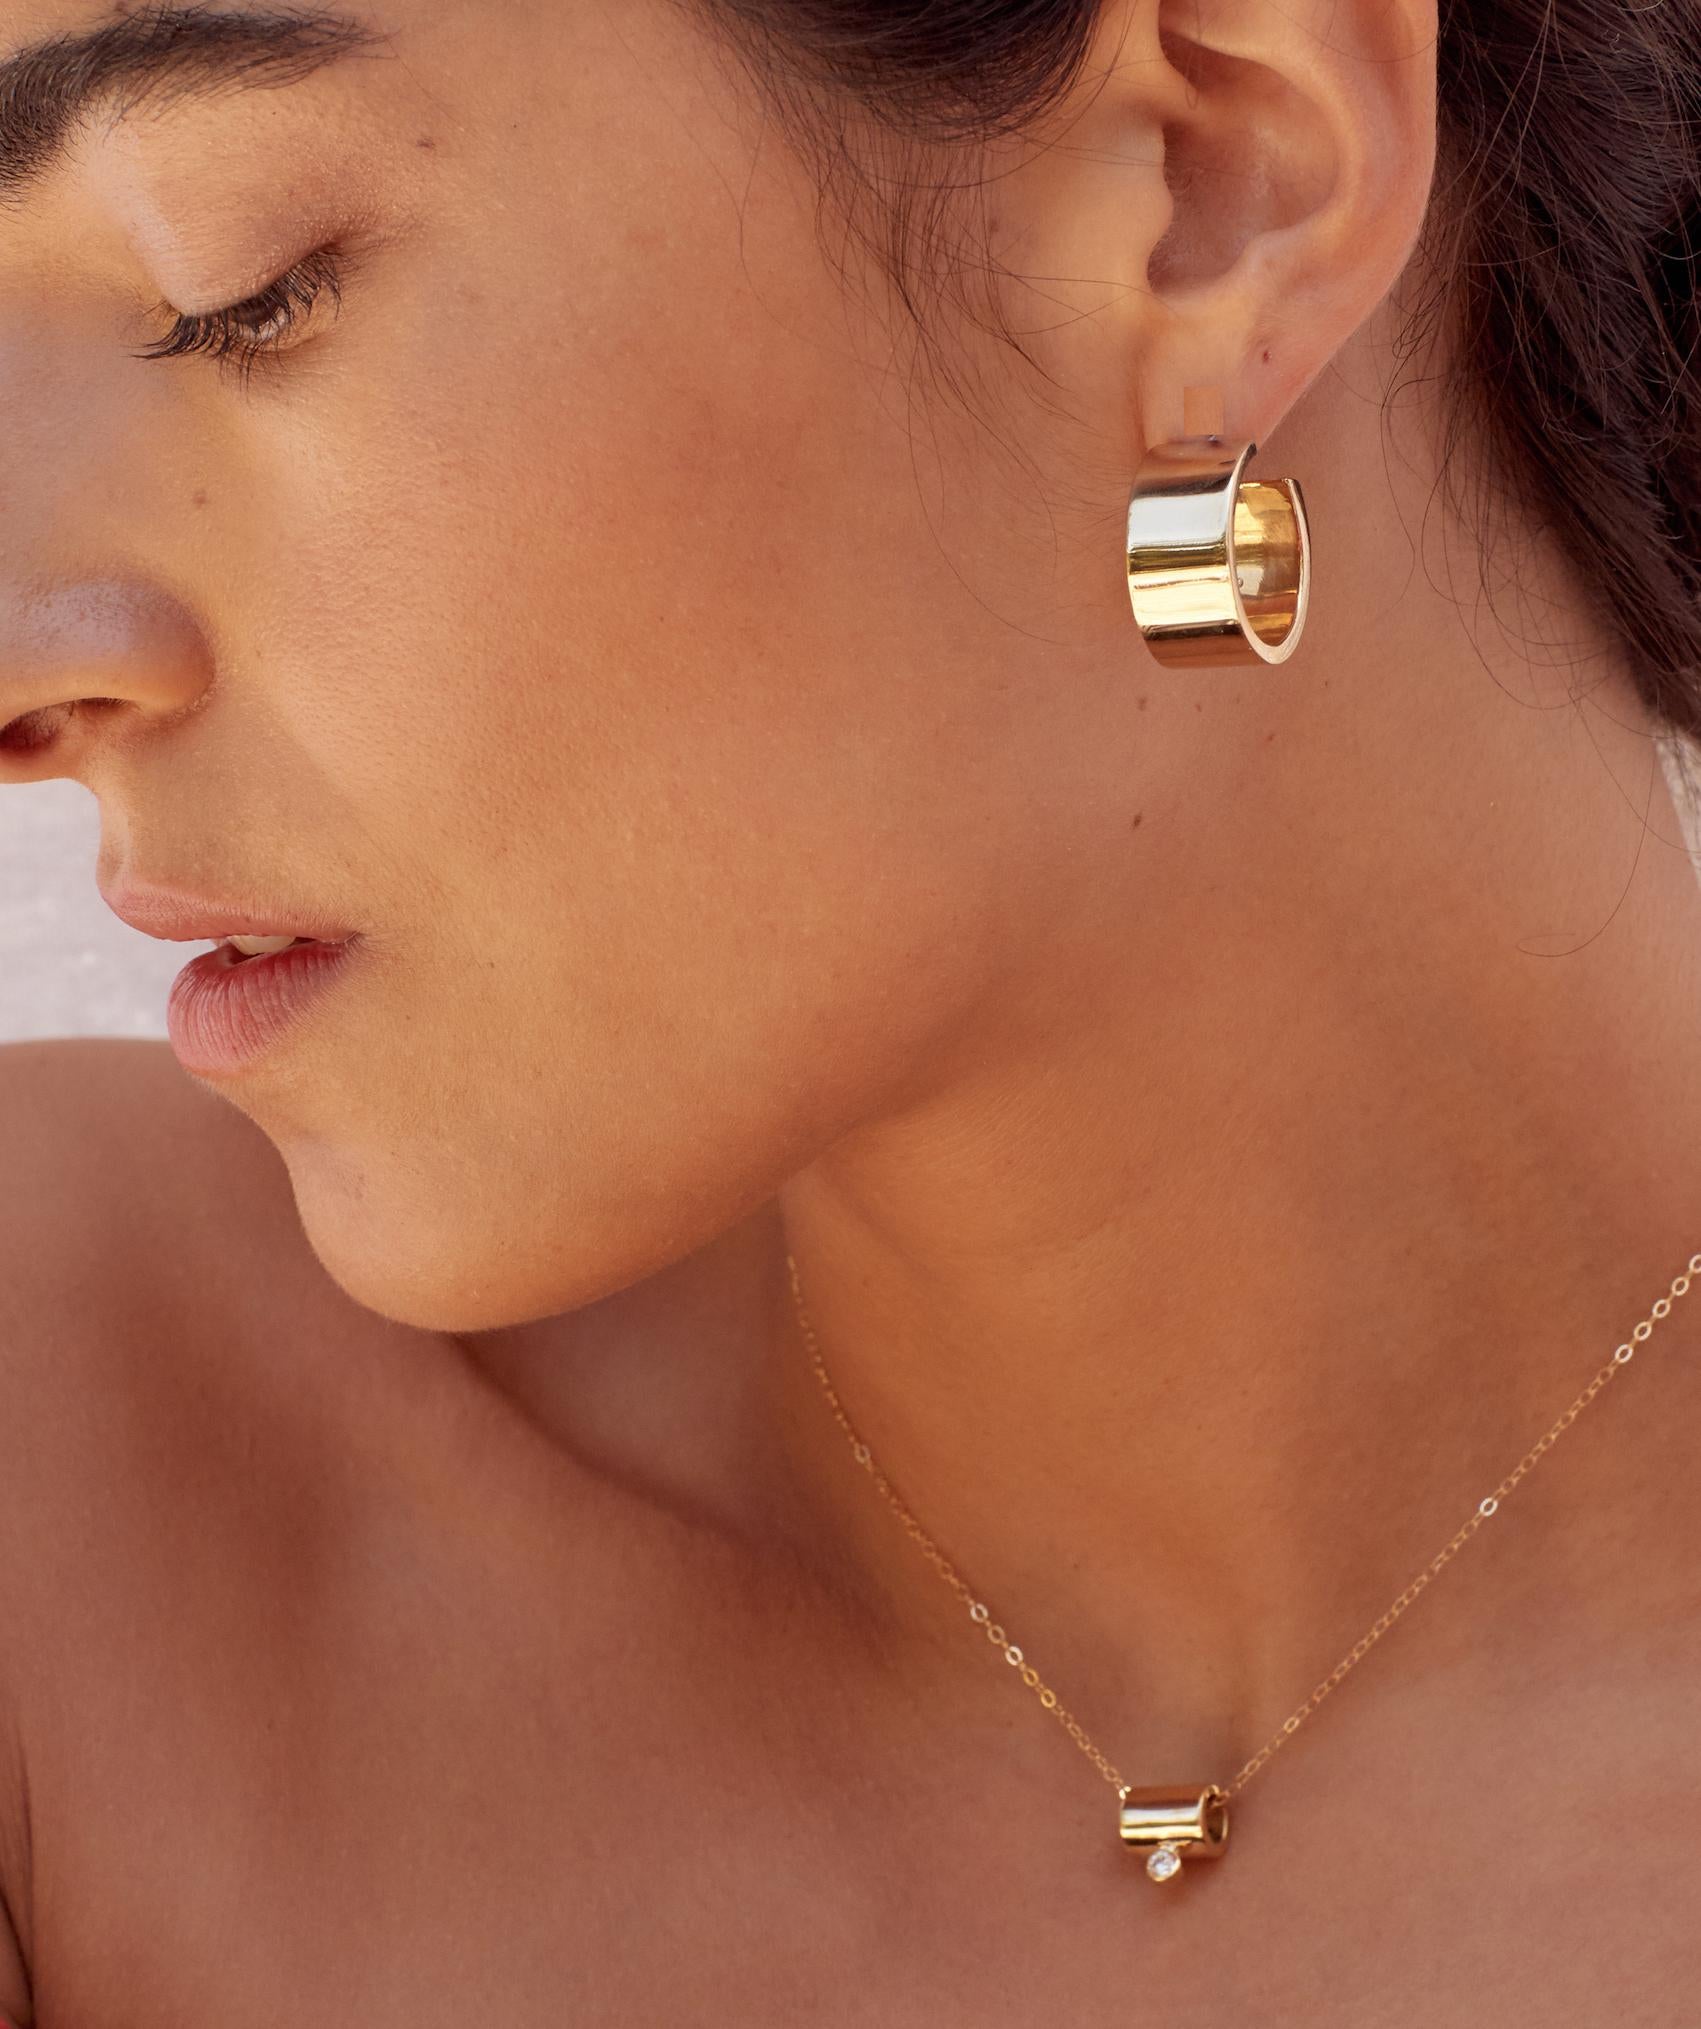 Modern Wide gold plated hoop earrings. 
For an everyday accent.
Each Jacqueline Rose piece is handcrafted in Los Angeles.
